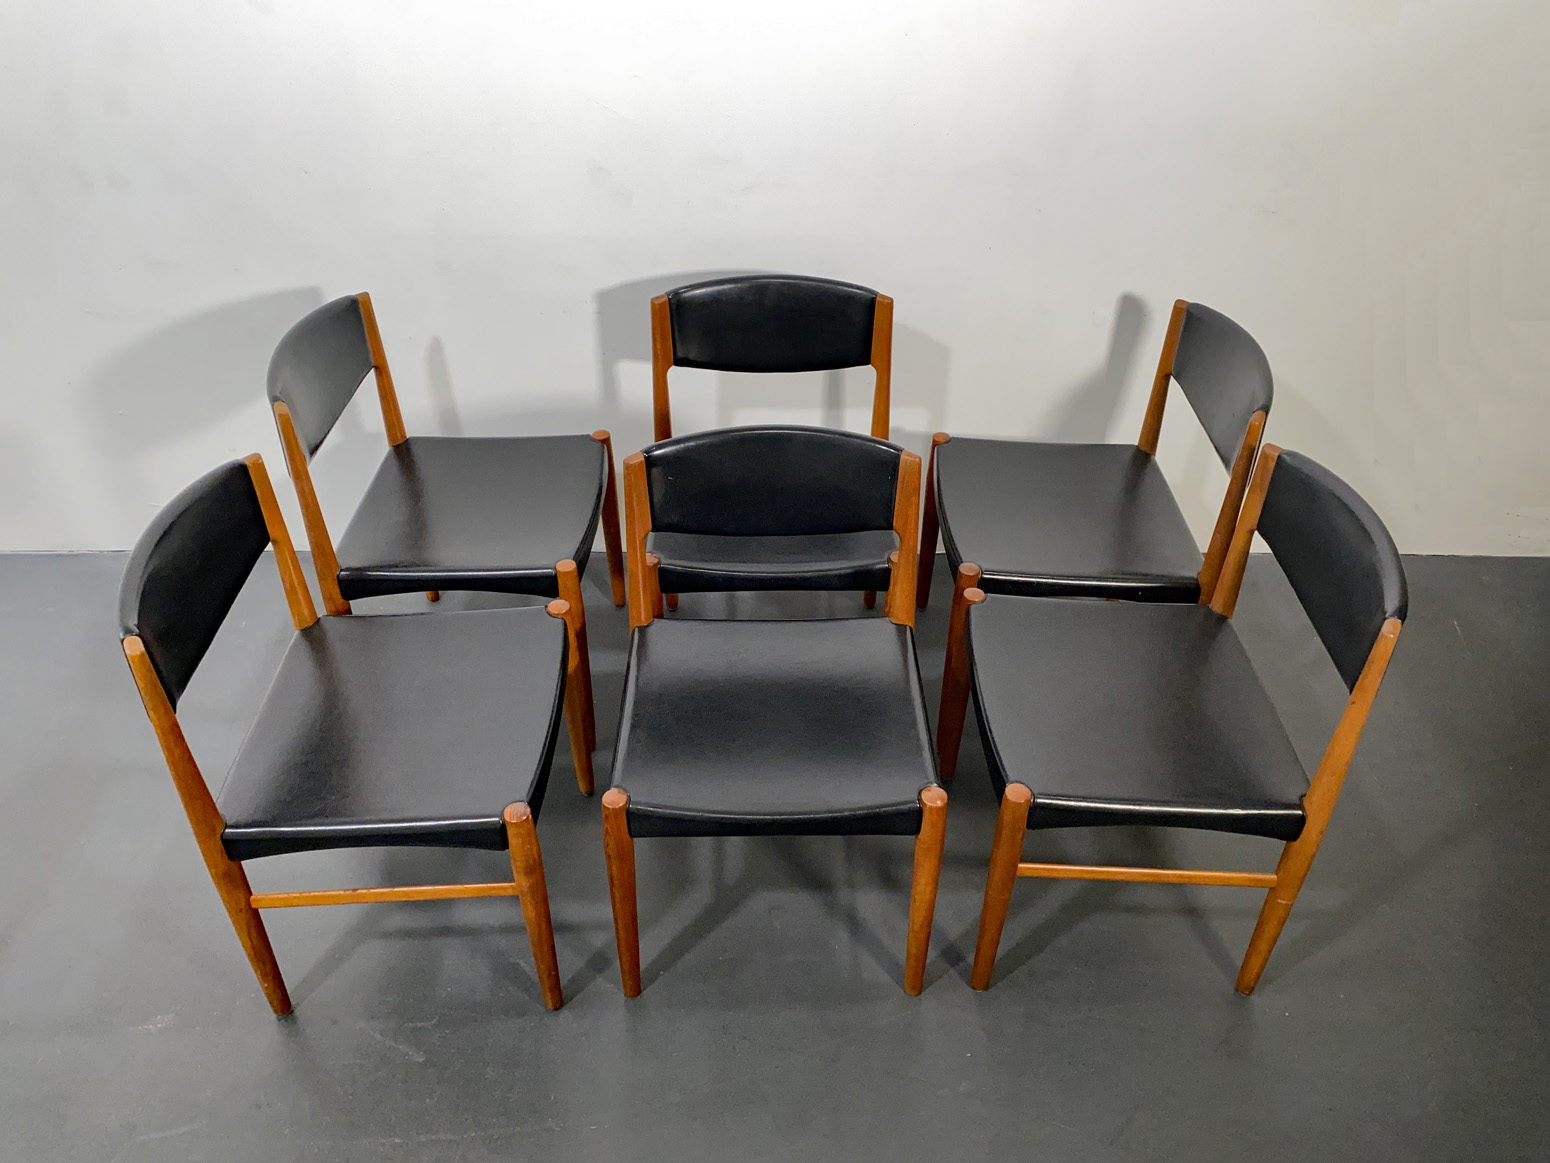 Set of 6 Mid Century Dining Chairs, Teak, Faux Leather, Glostrup, Denmark, 1960’s.